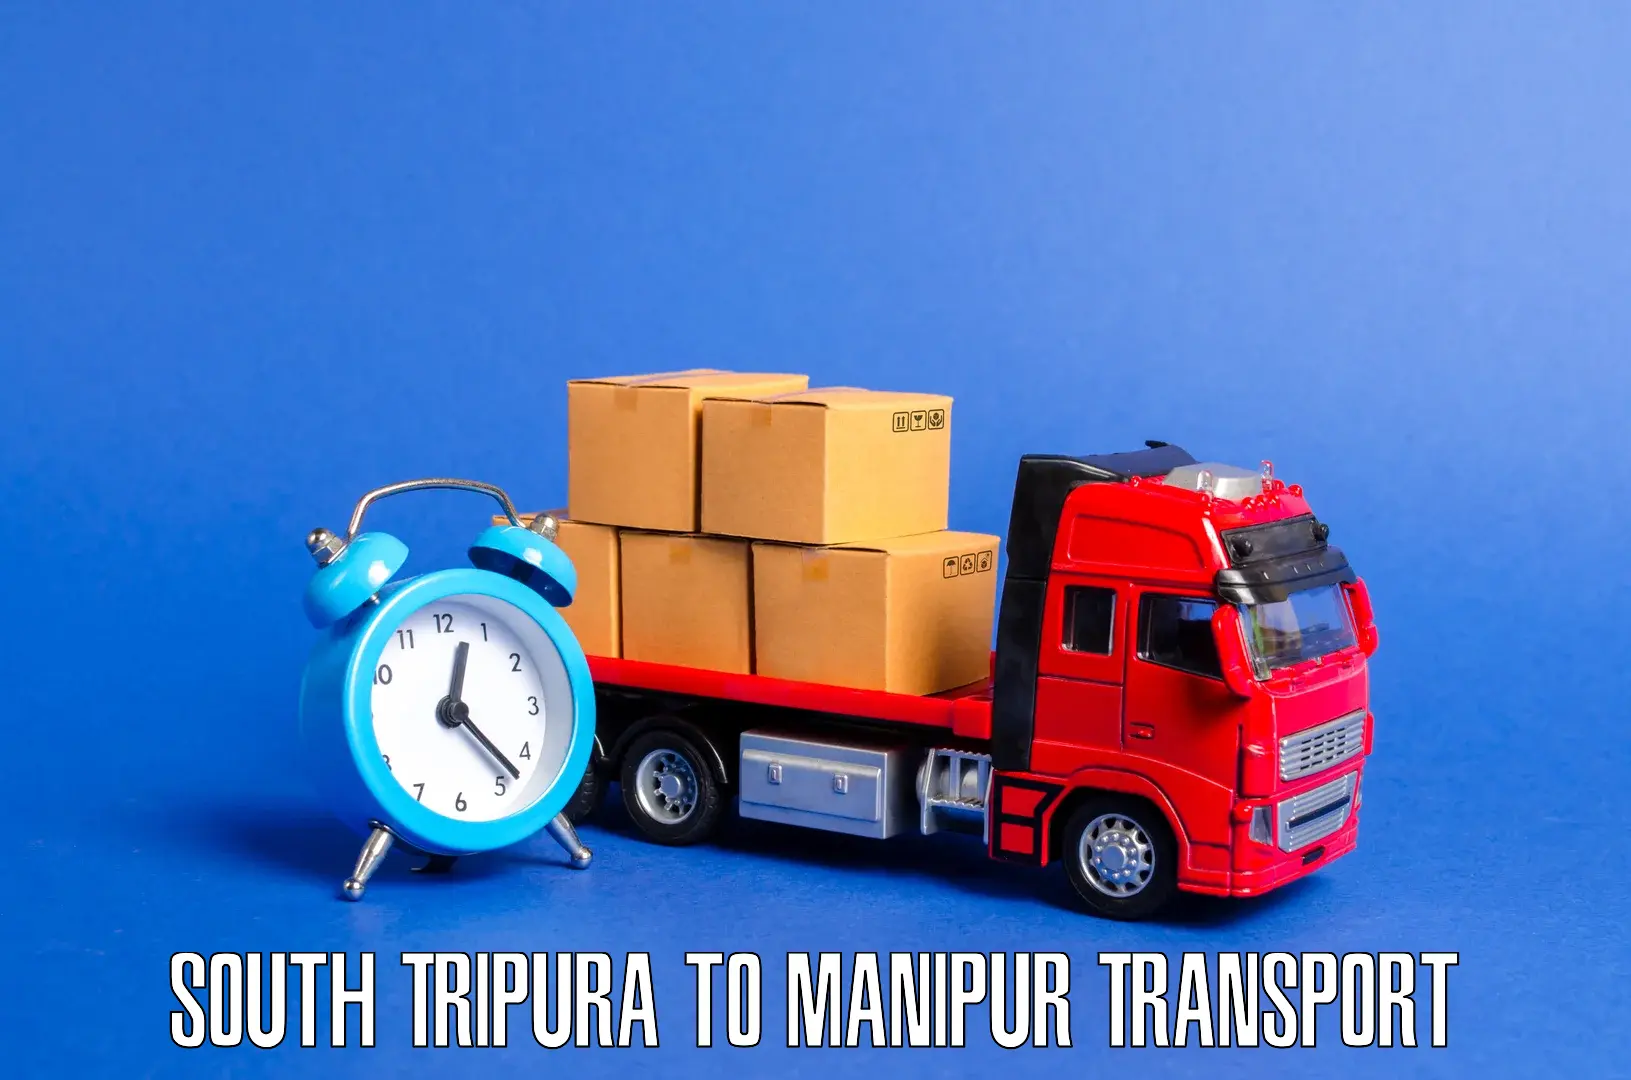 Nationwide transport services in South Tripura to Senapati